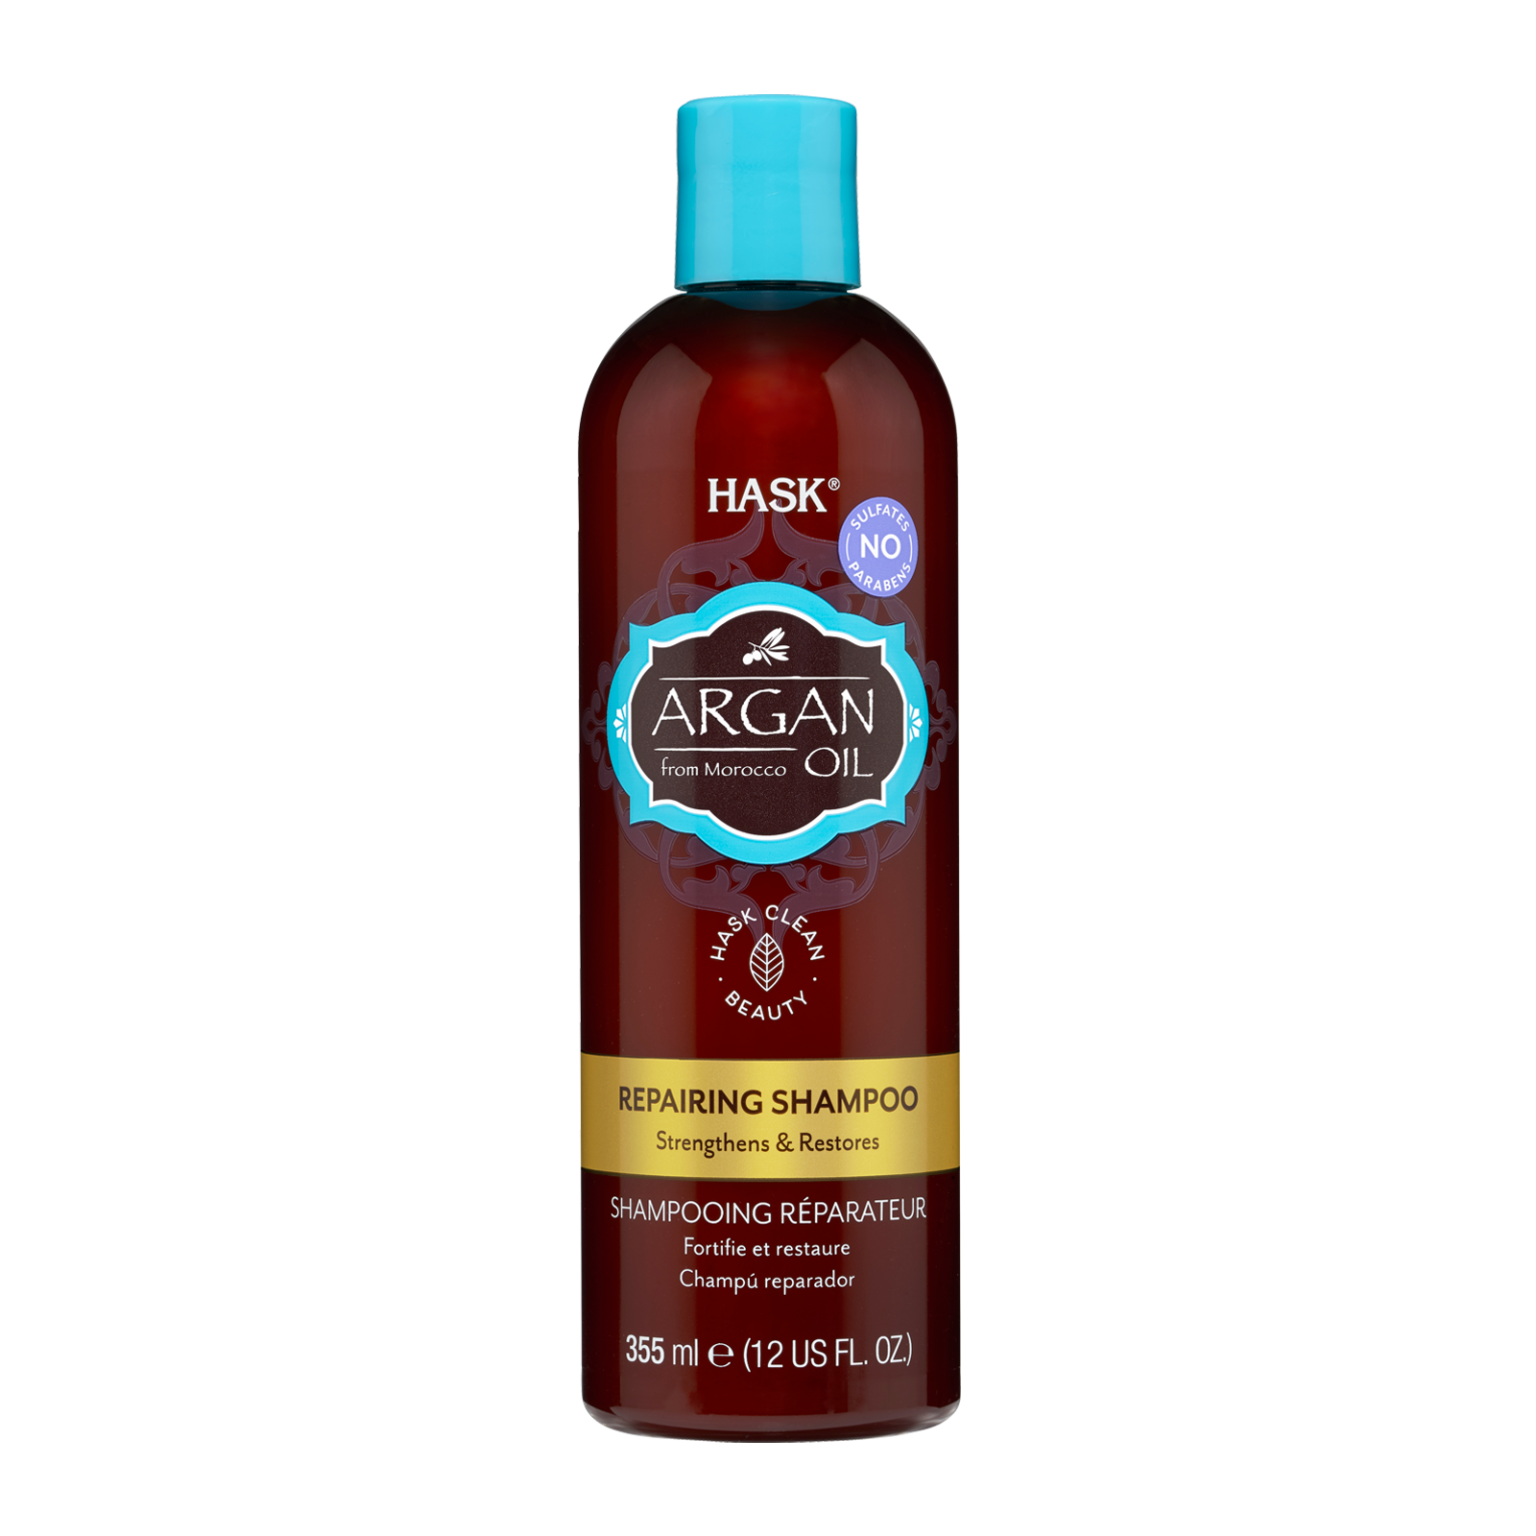 Hask Argan Oil From Morocco Repairing Shampoo & Conditioner